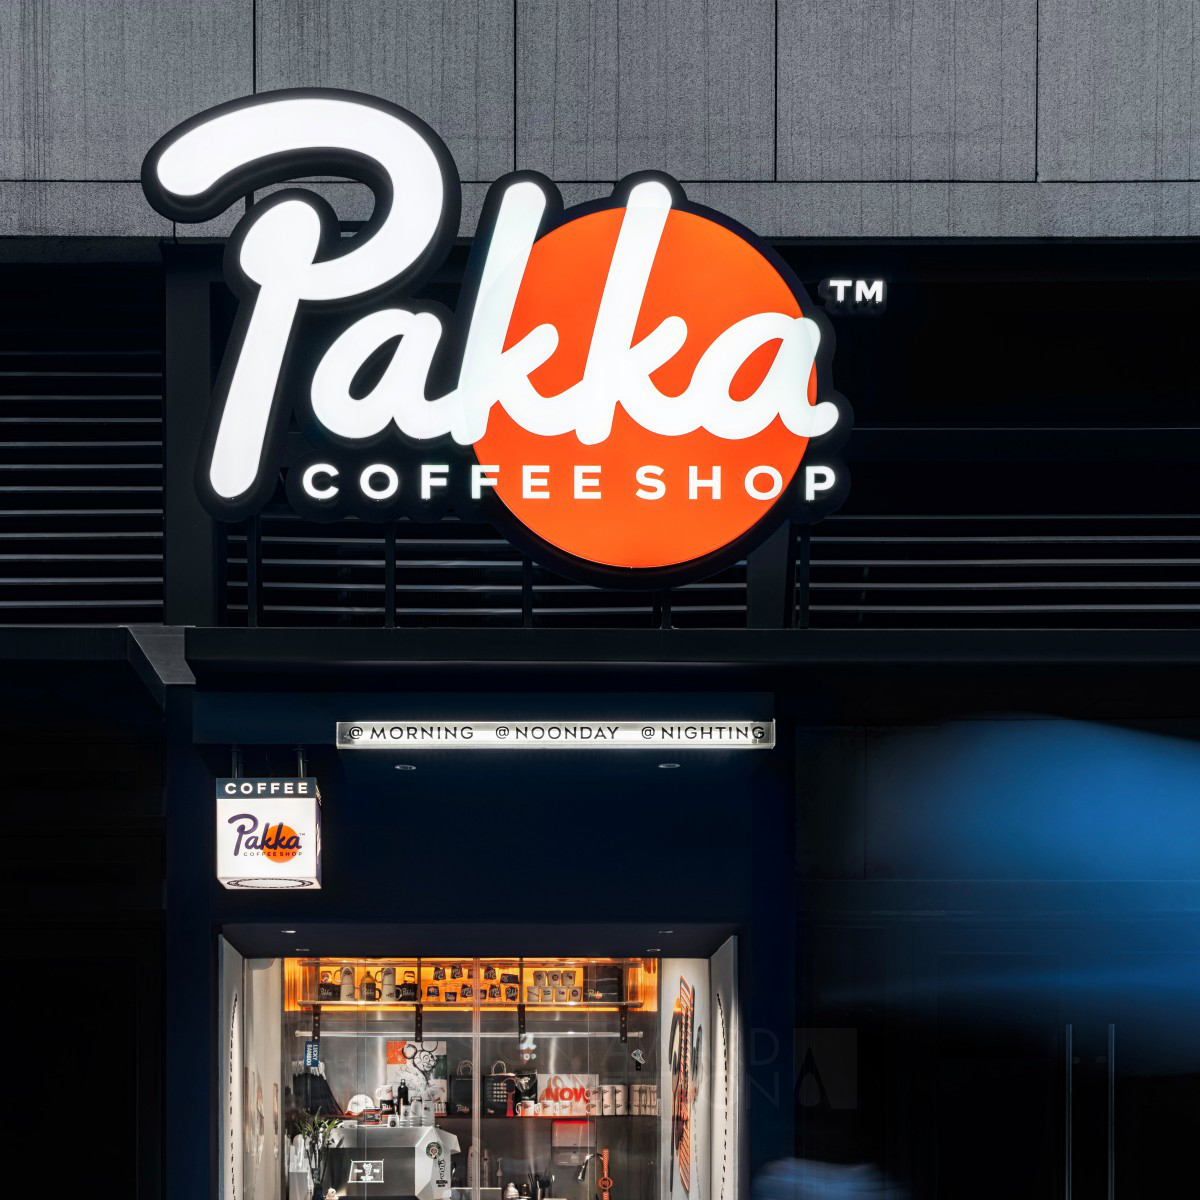 Pakka Coffee Shop: A Blend of American Street Style and Coffee Culture